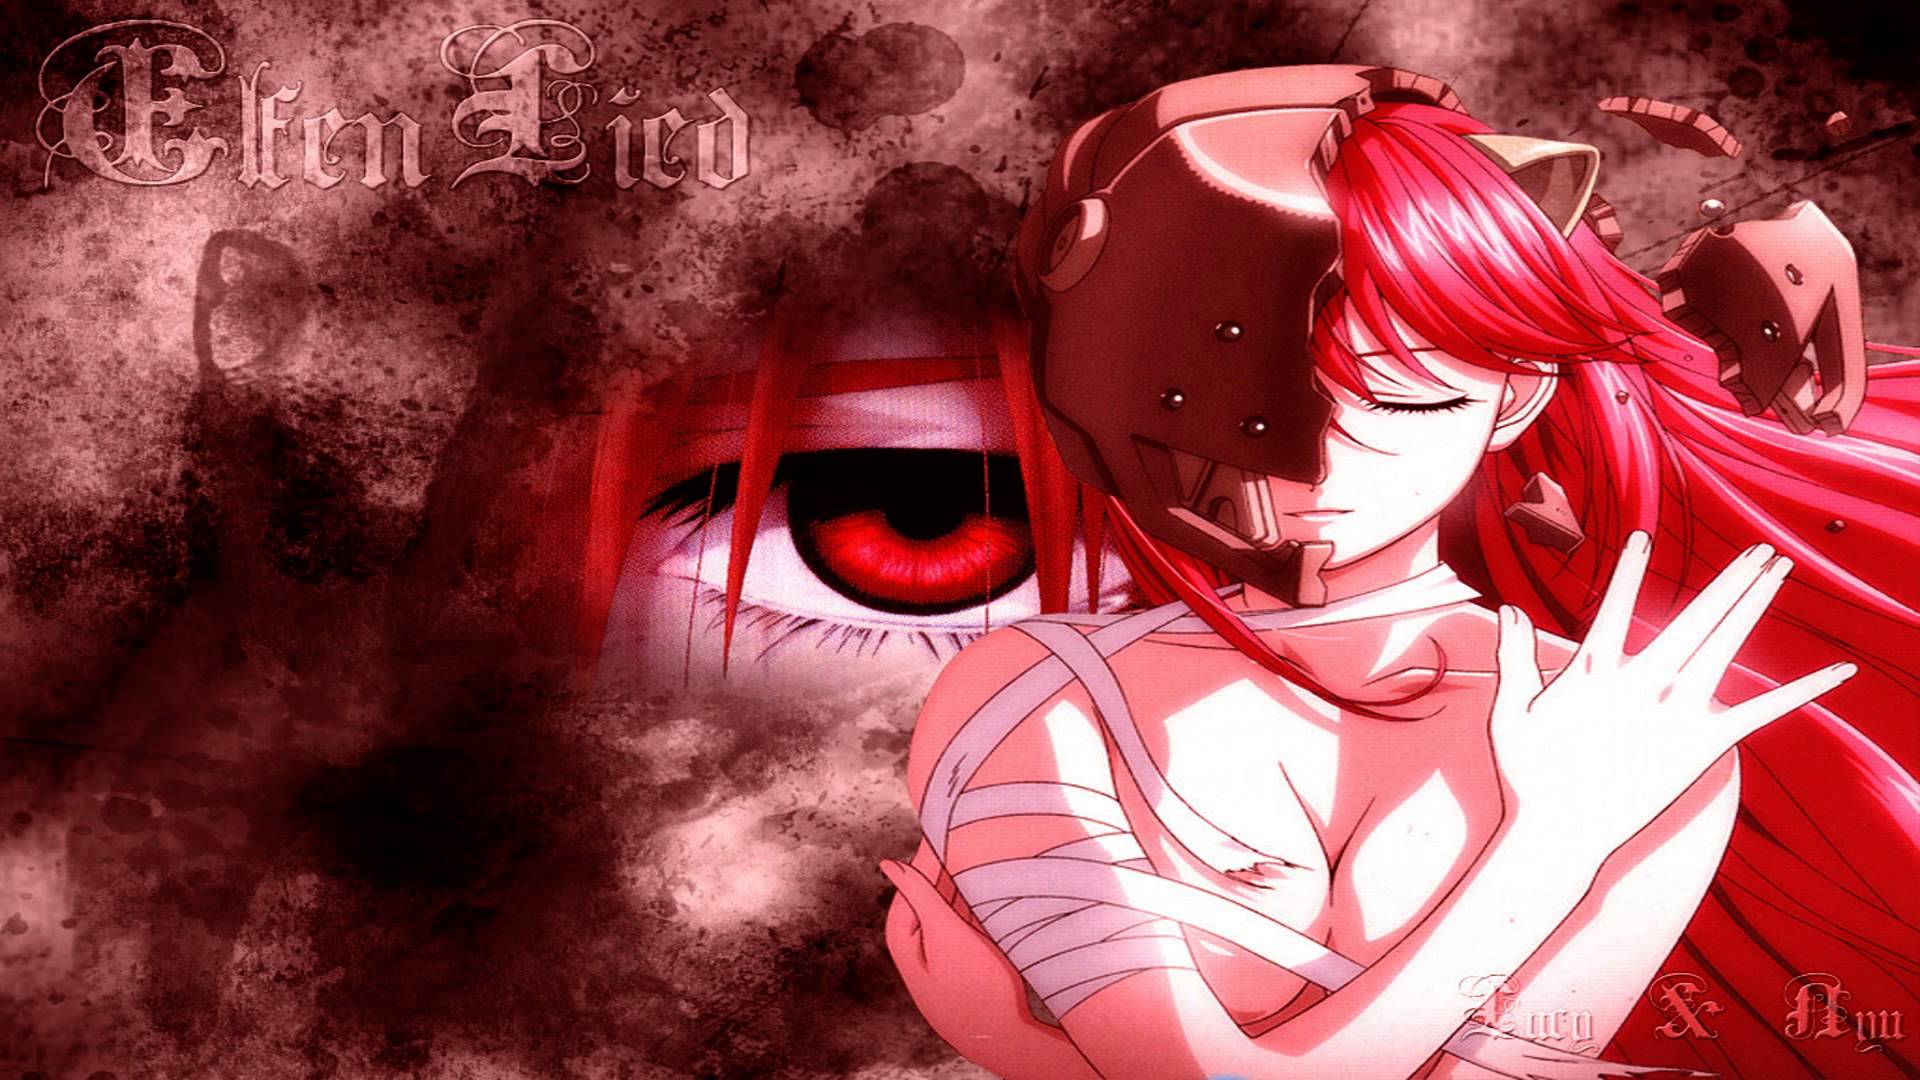 Lucy in Elfen Lied wallpaper  Anime wallpapers  50421